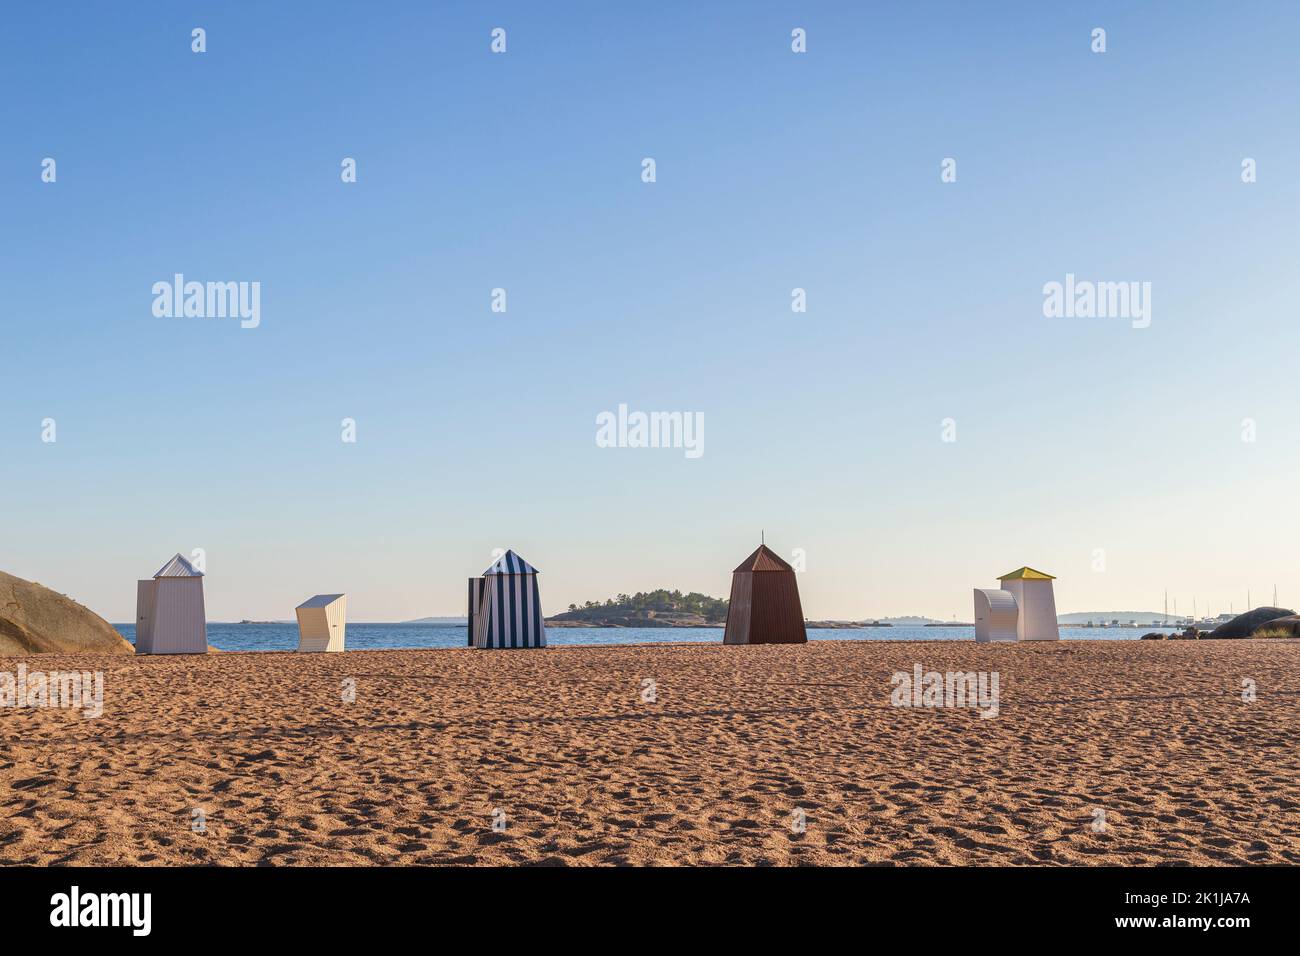 Wooden changing booths or huts at the empty and sandy Casino beach in downtown Hanko, Finland, on a sunny day in the summer. Copy space. Stock Photo